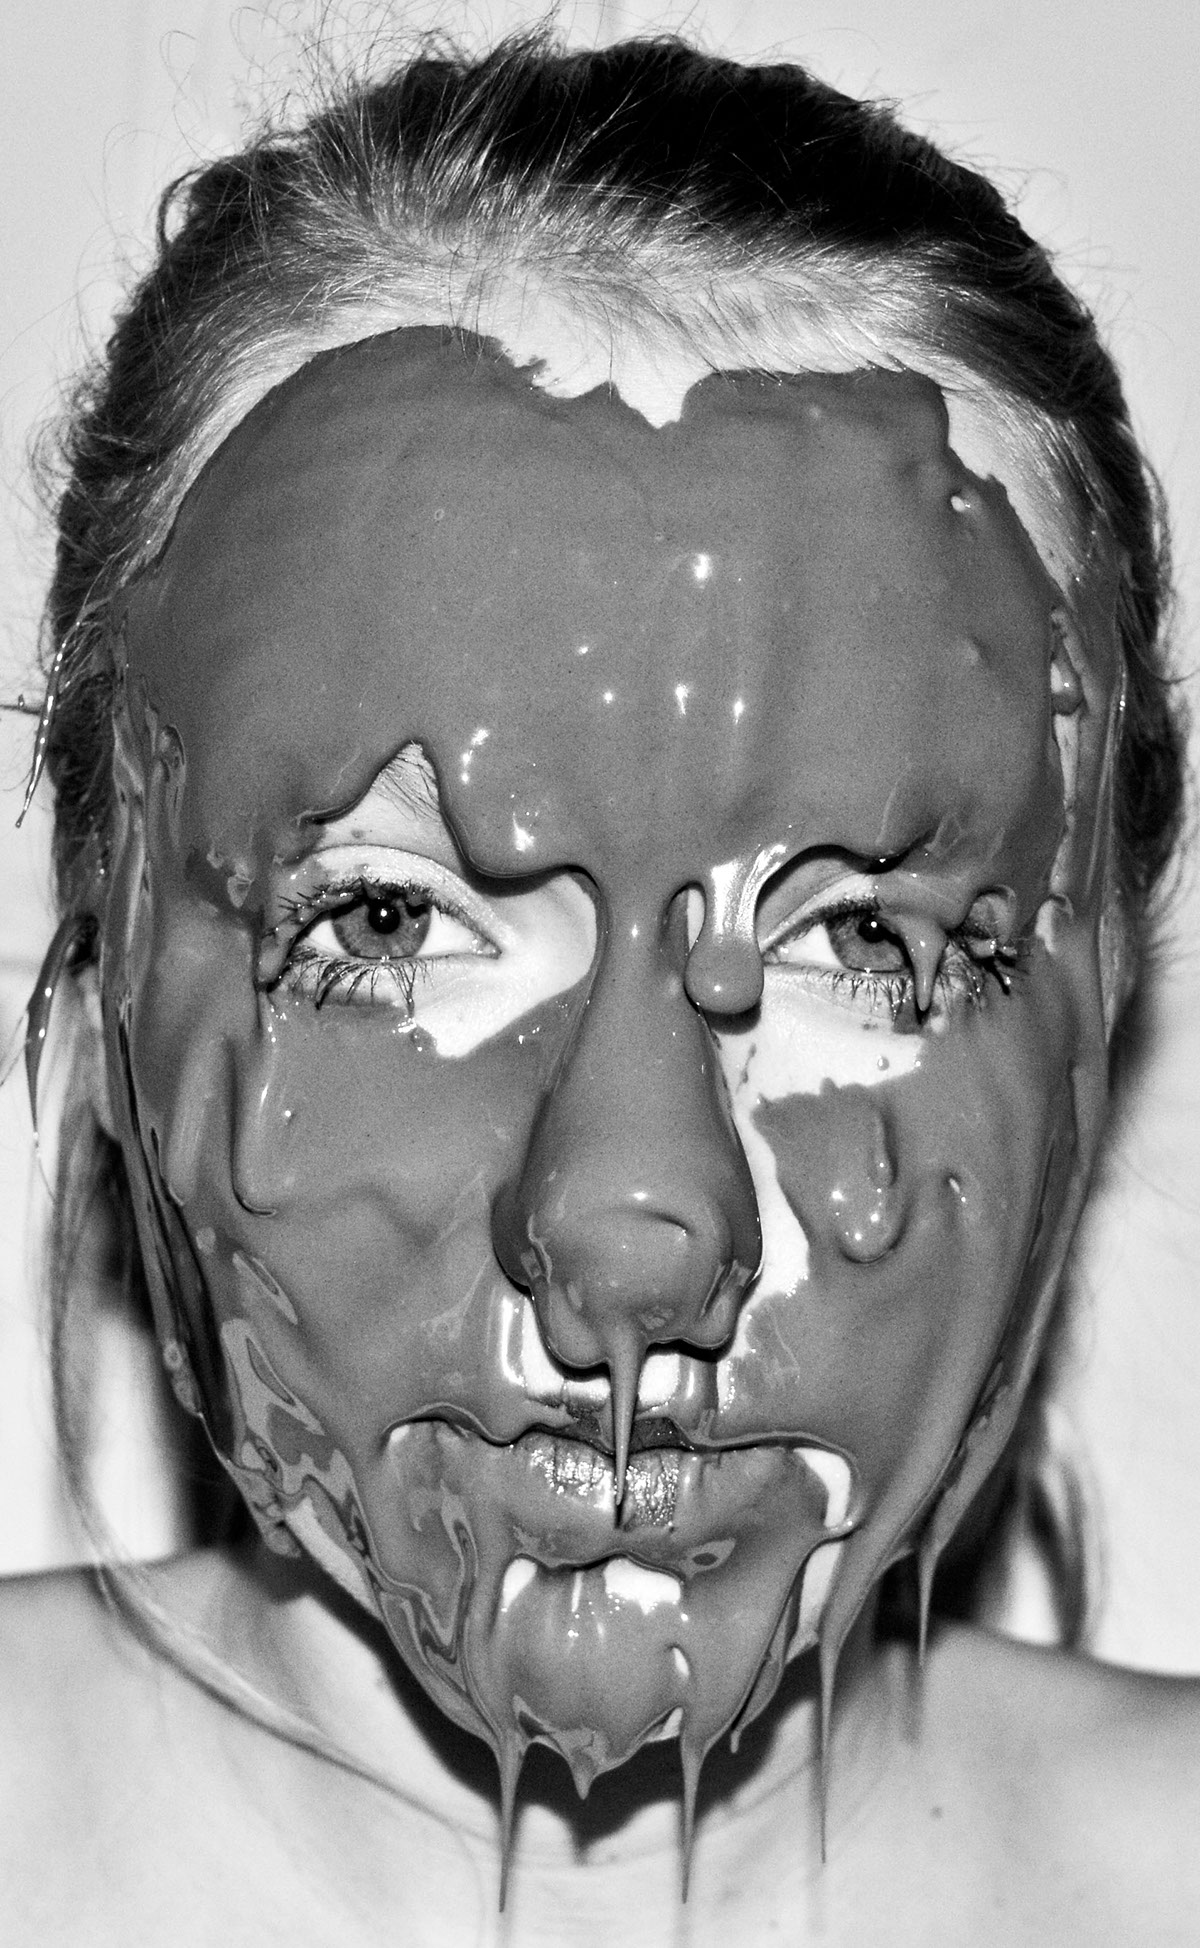 gluttony conflict society social anxiety judged by society Custard chocolate sprinkles popcorn jelly Food on Face Portraiture human face deformed human face